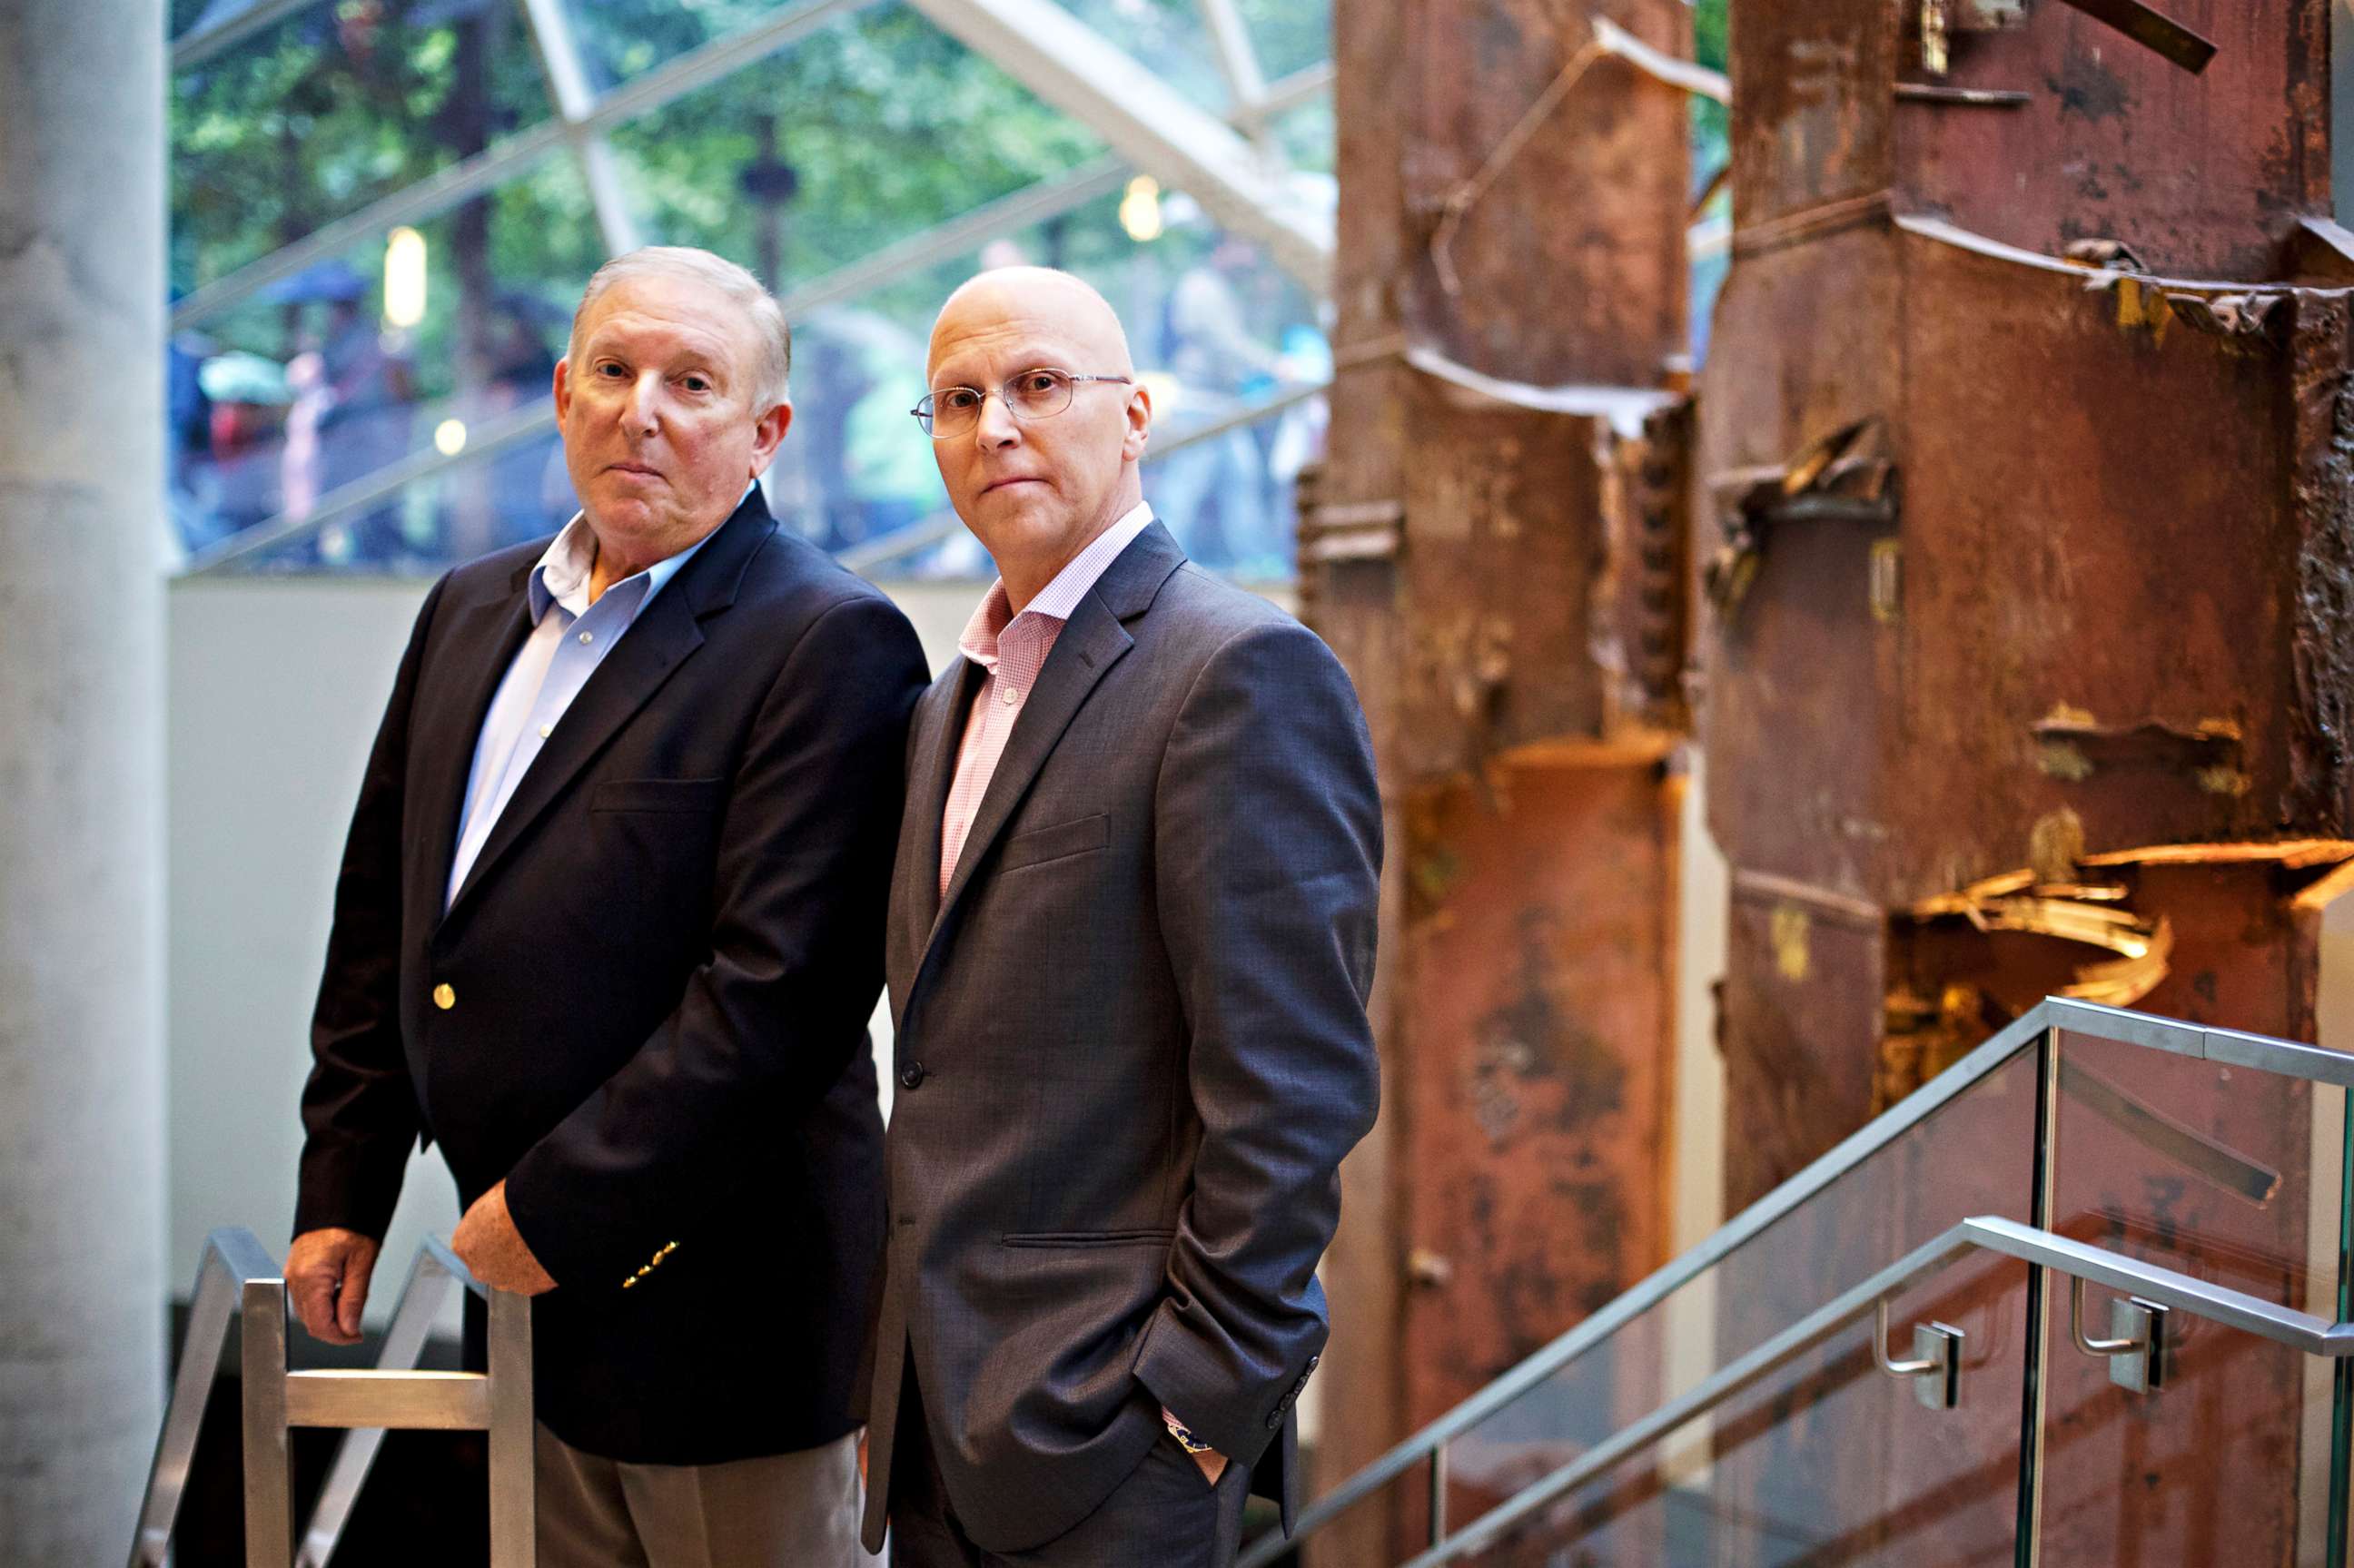 PHOTO: Jeff Flynn and John Mormando worked in lower Manhattan in the wake of the September 11 World Trade Center attacks in 2001 and they have both been diagnosed with breast cancer.